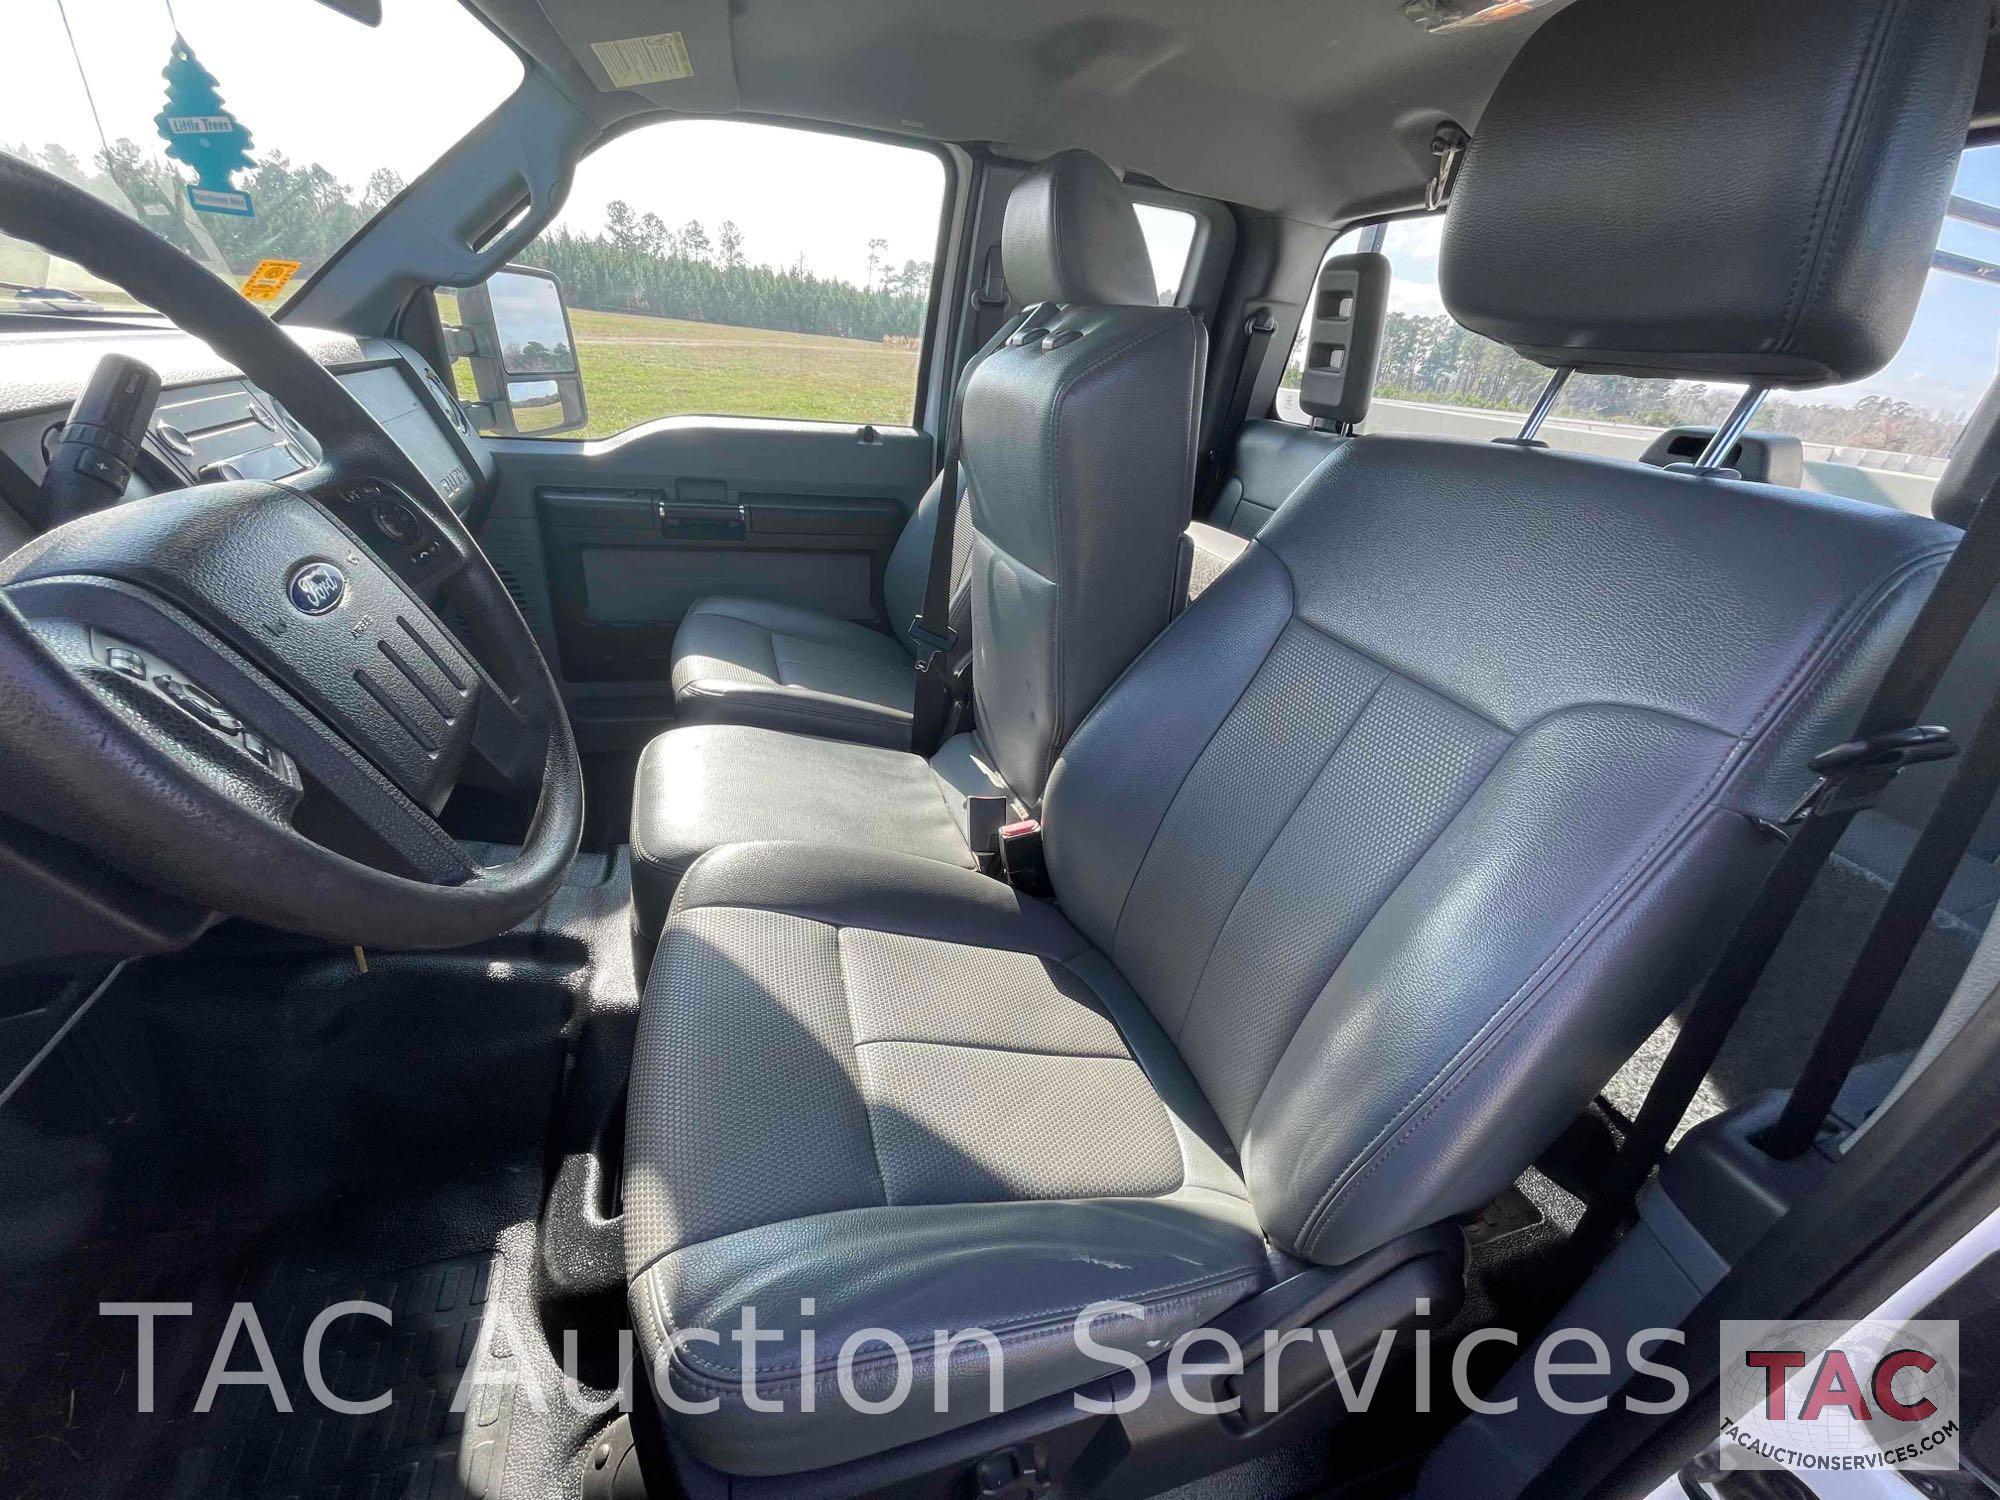 2016 Ford F250 Extended Cab Service Truck